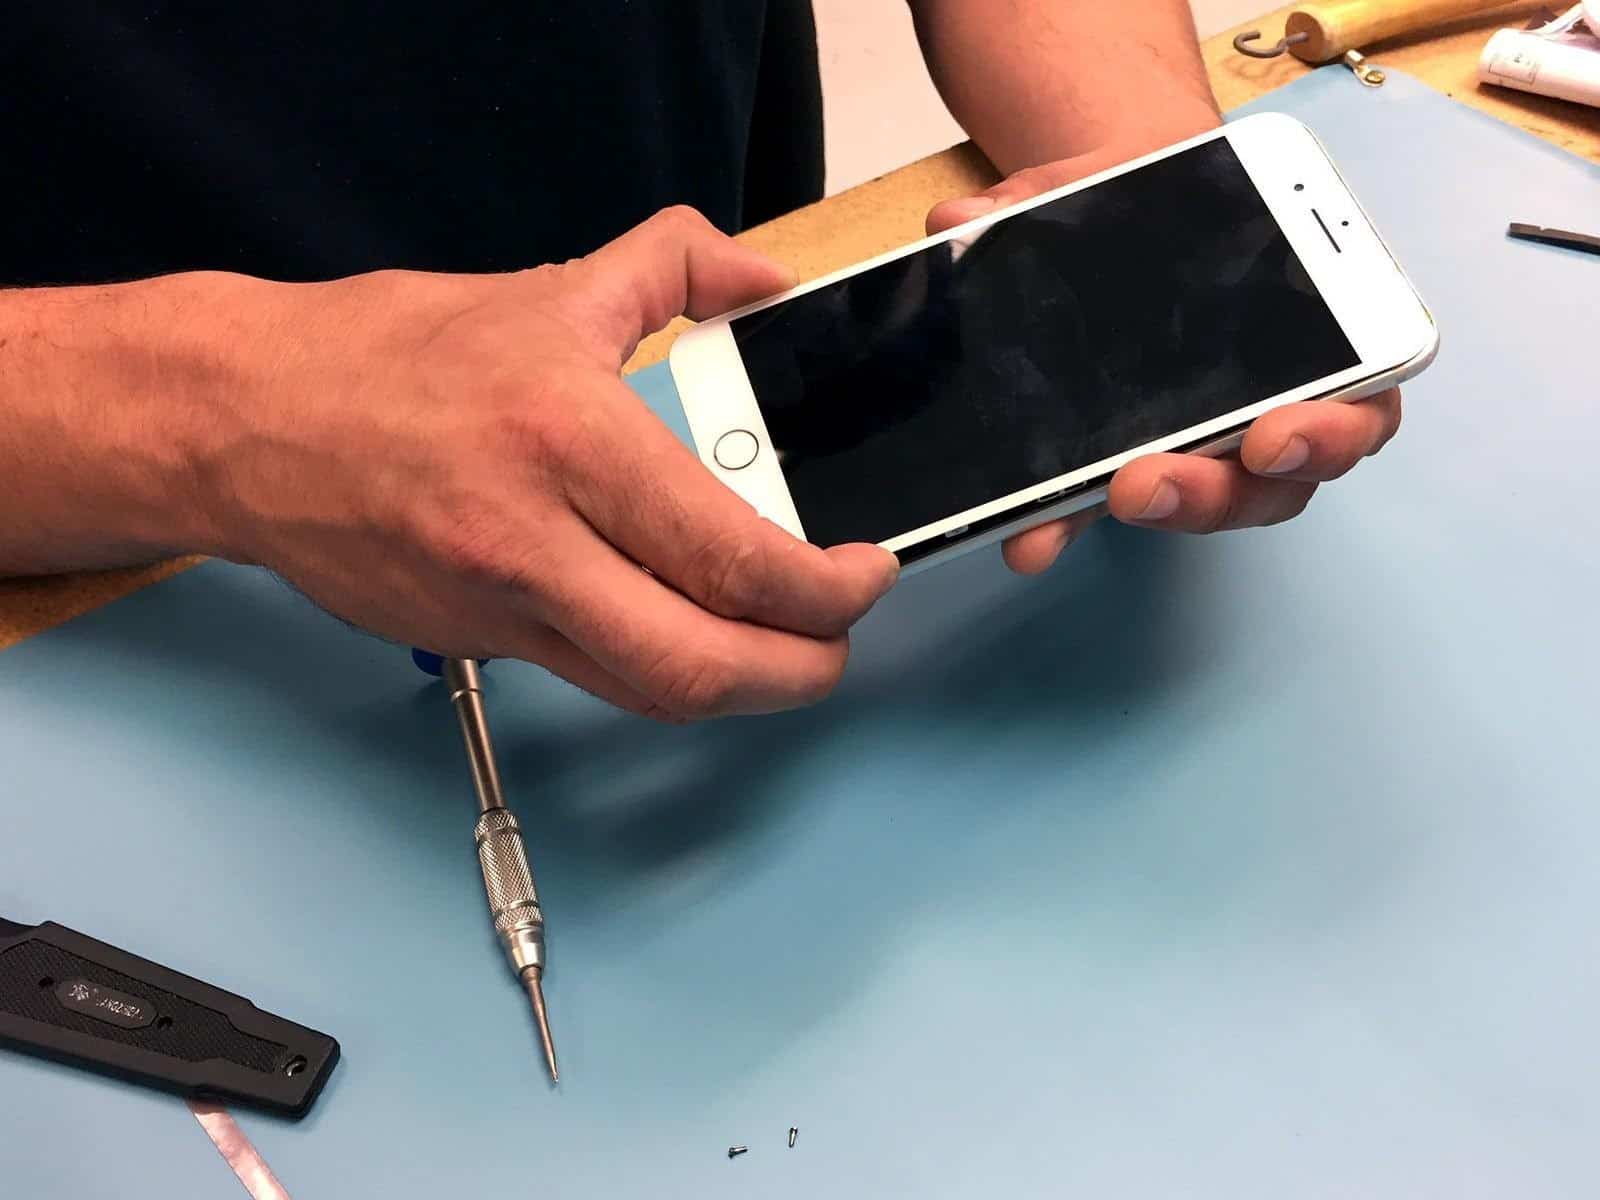 Get your iPhone repaired efficiently